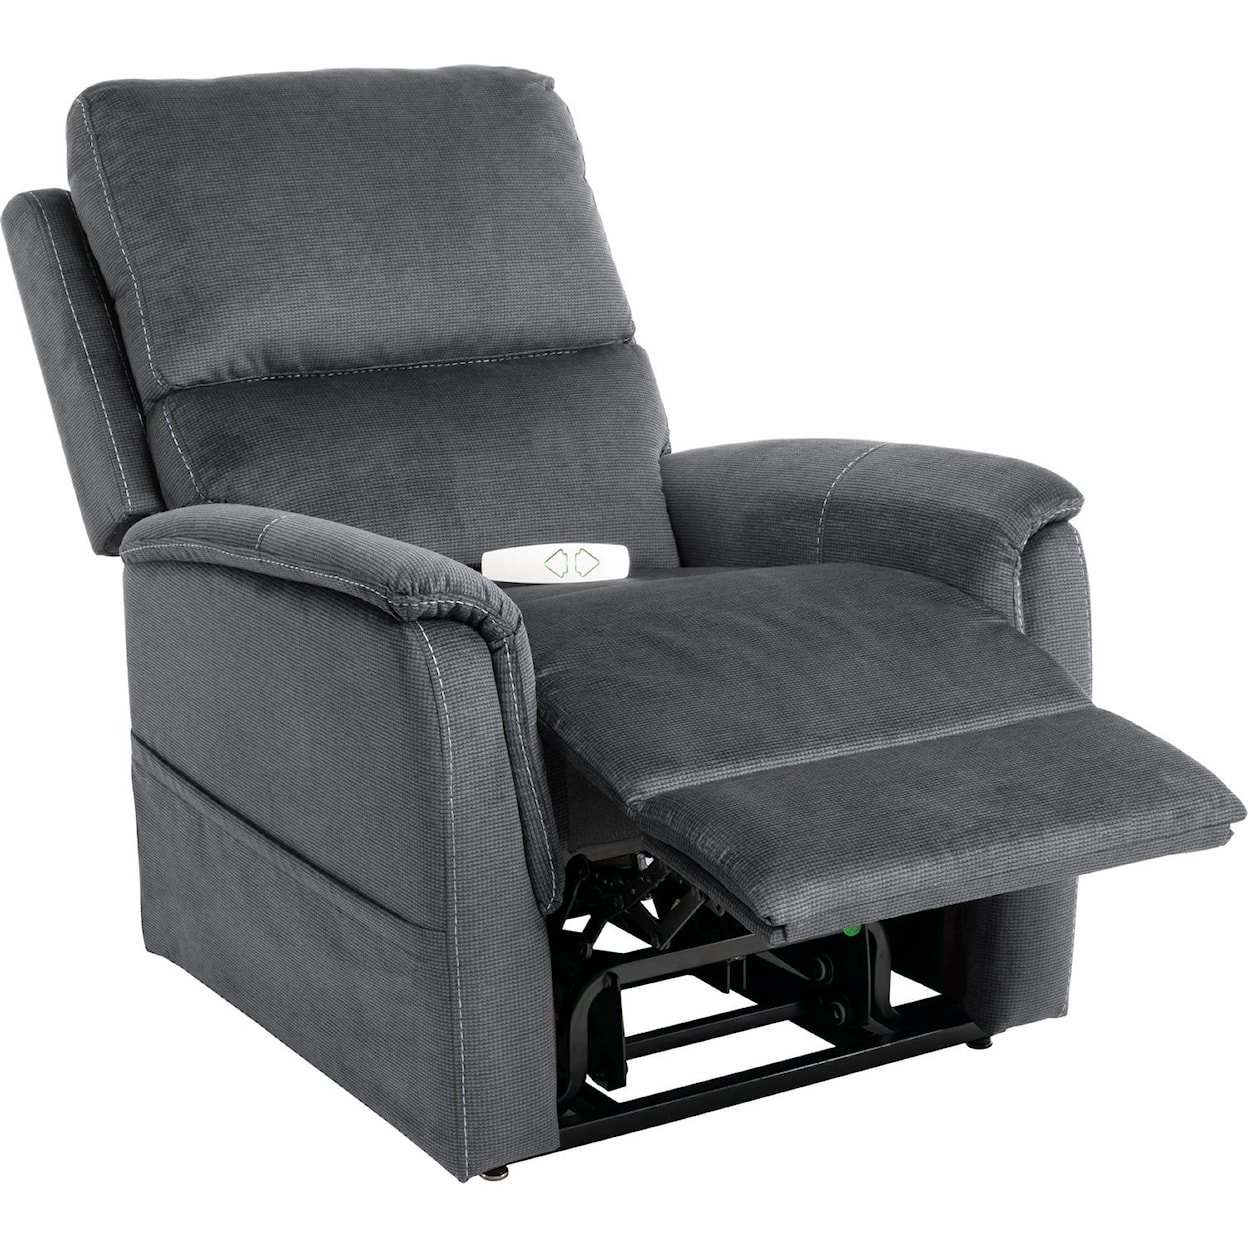 Windermere Motion Chaise Lounge Lift Recliner